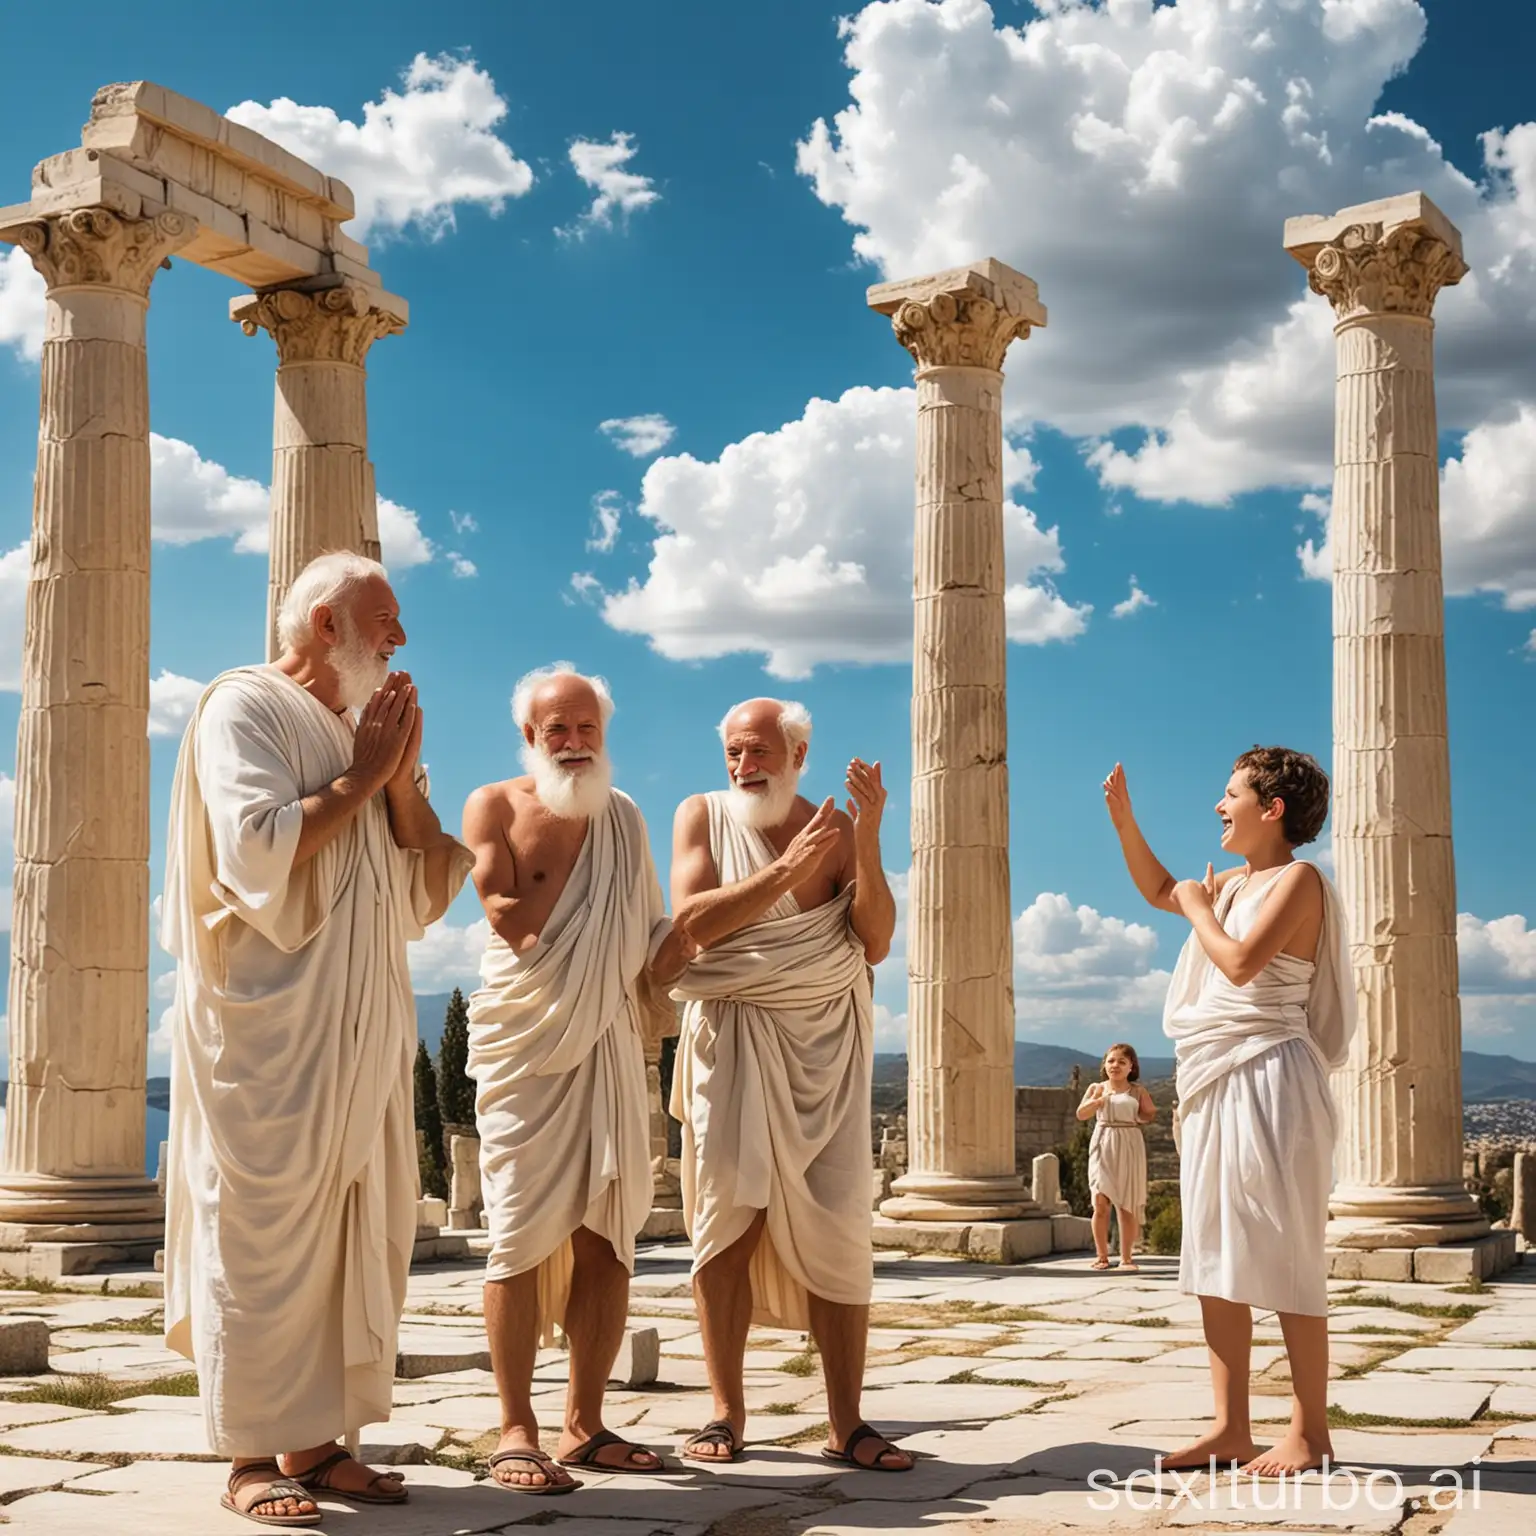 ancient Greek philosophers in a Greek temple cheering and clapping a small child singing, child centred in picture. Frail old men. Bright summer day under blue skies with puffy white clouds.